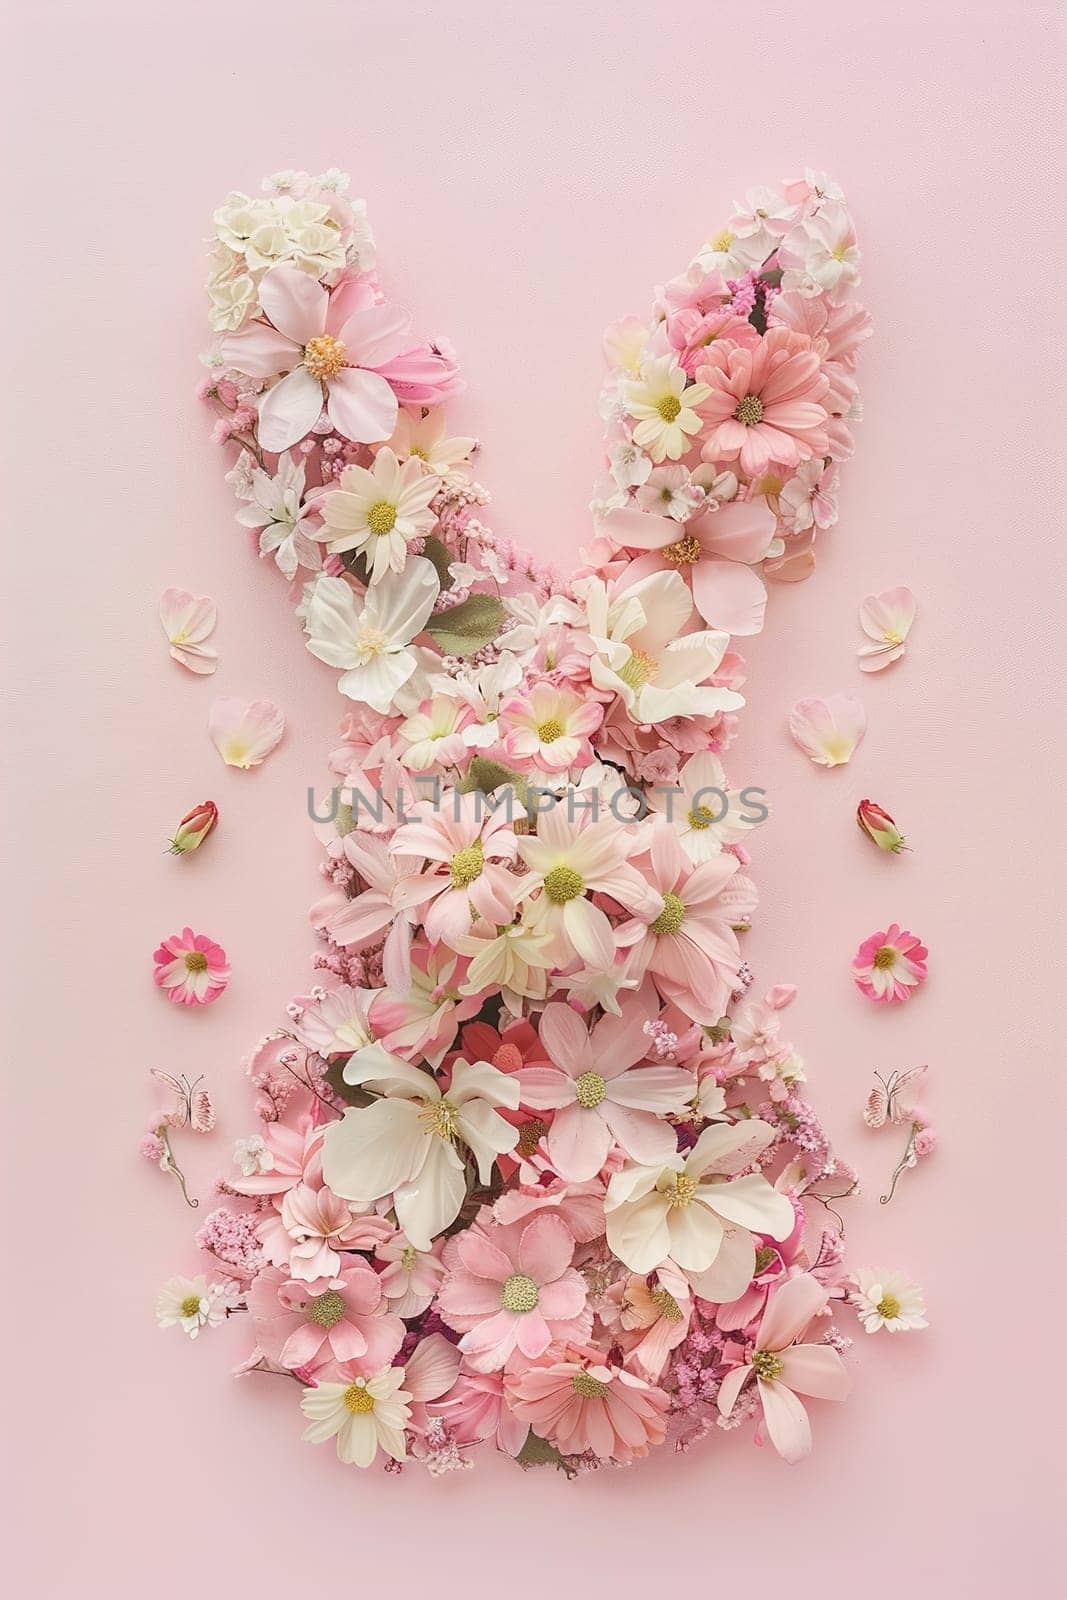 A delightful pastel background showcasing a bunny-shaped arrangement of various spring flowers, ideal for Easter promotions, springtime marketing, or creative floristry designs. Generative AI